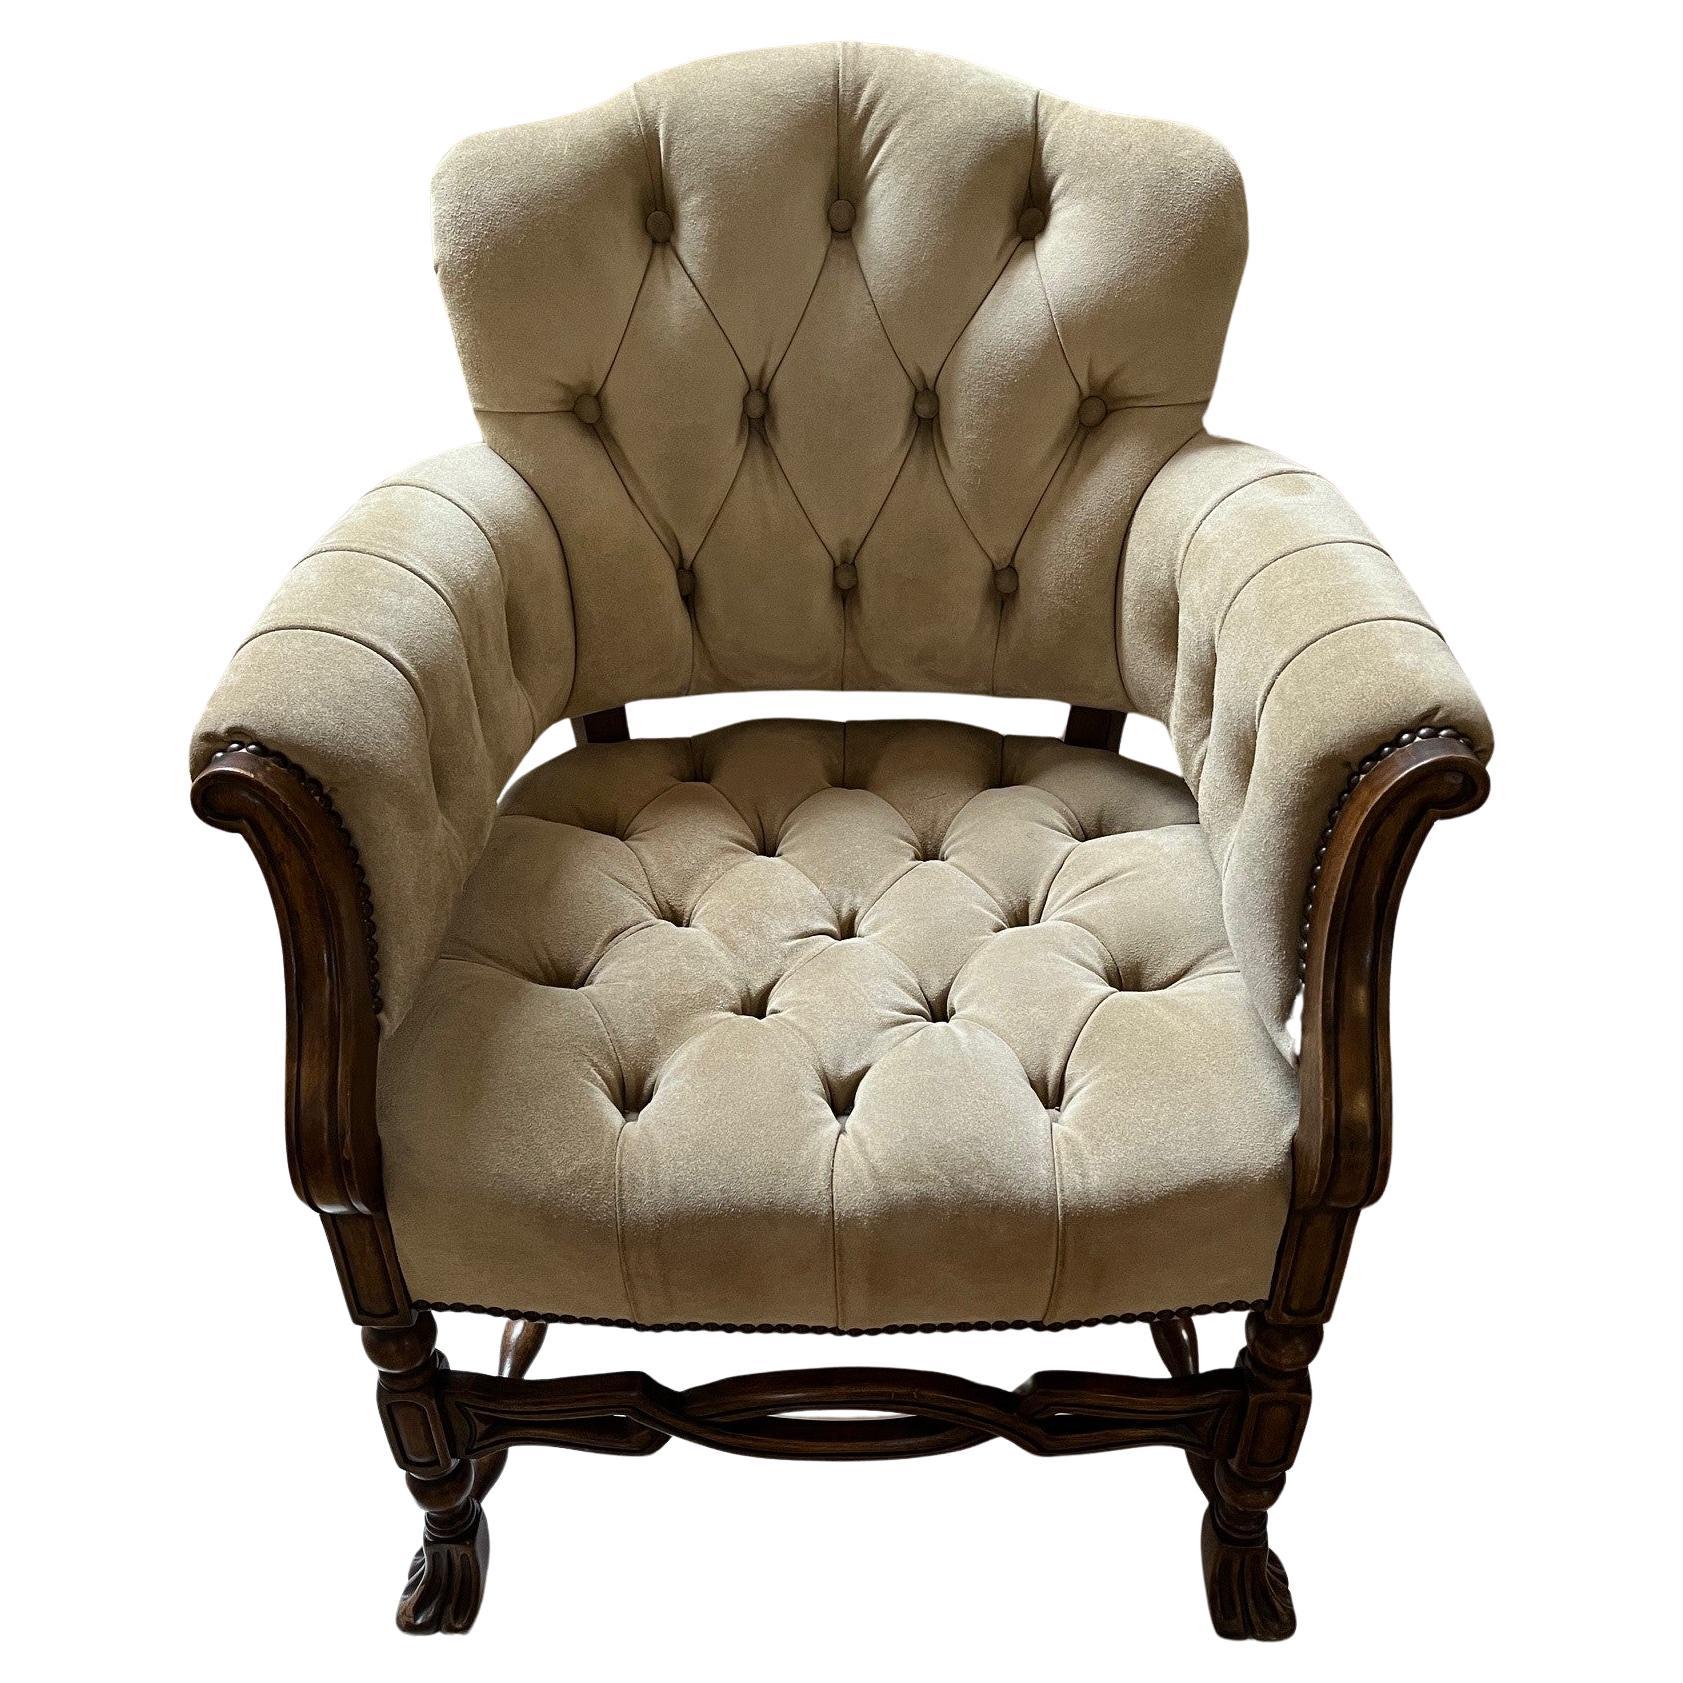 Made to Order Elegant Tufted Seat and Back in Beige Suede Leather Seville Chair For Sale